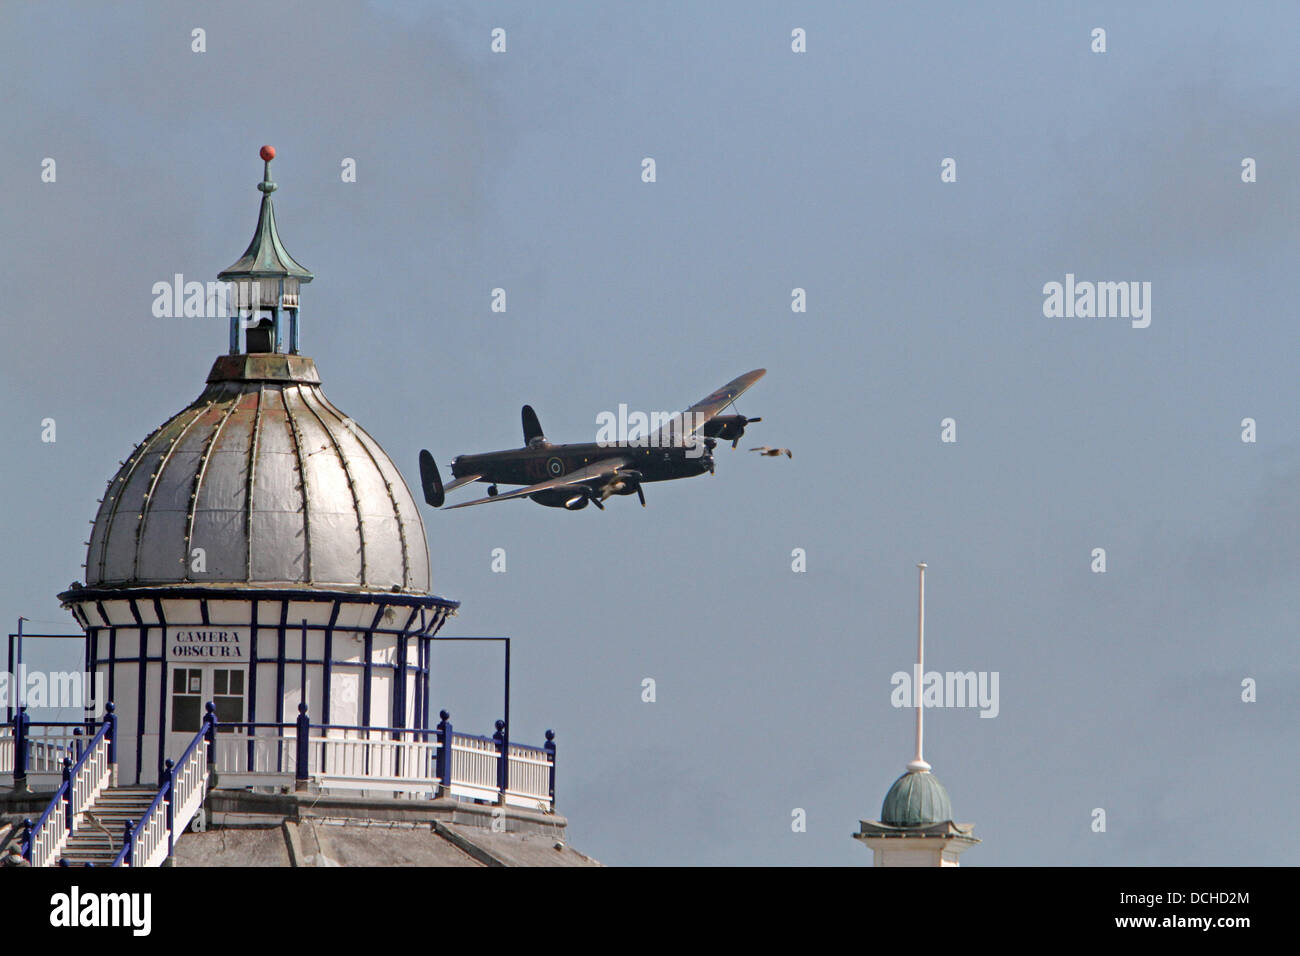 Eastbourne, UK.18th Aug, 2013. A lancaster bomber plane flies over the pier in the sunshine during the Aibourne air display in Eastbourn Credit: Keith Larby/Alamy live News Stock Photo